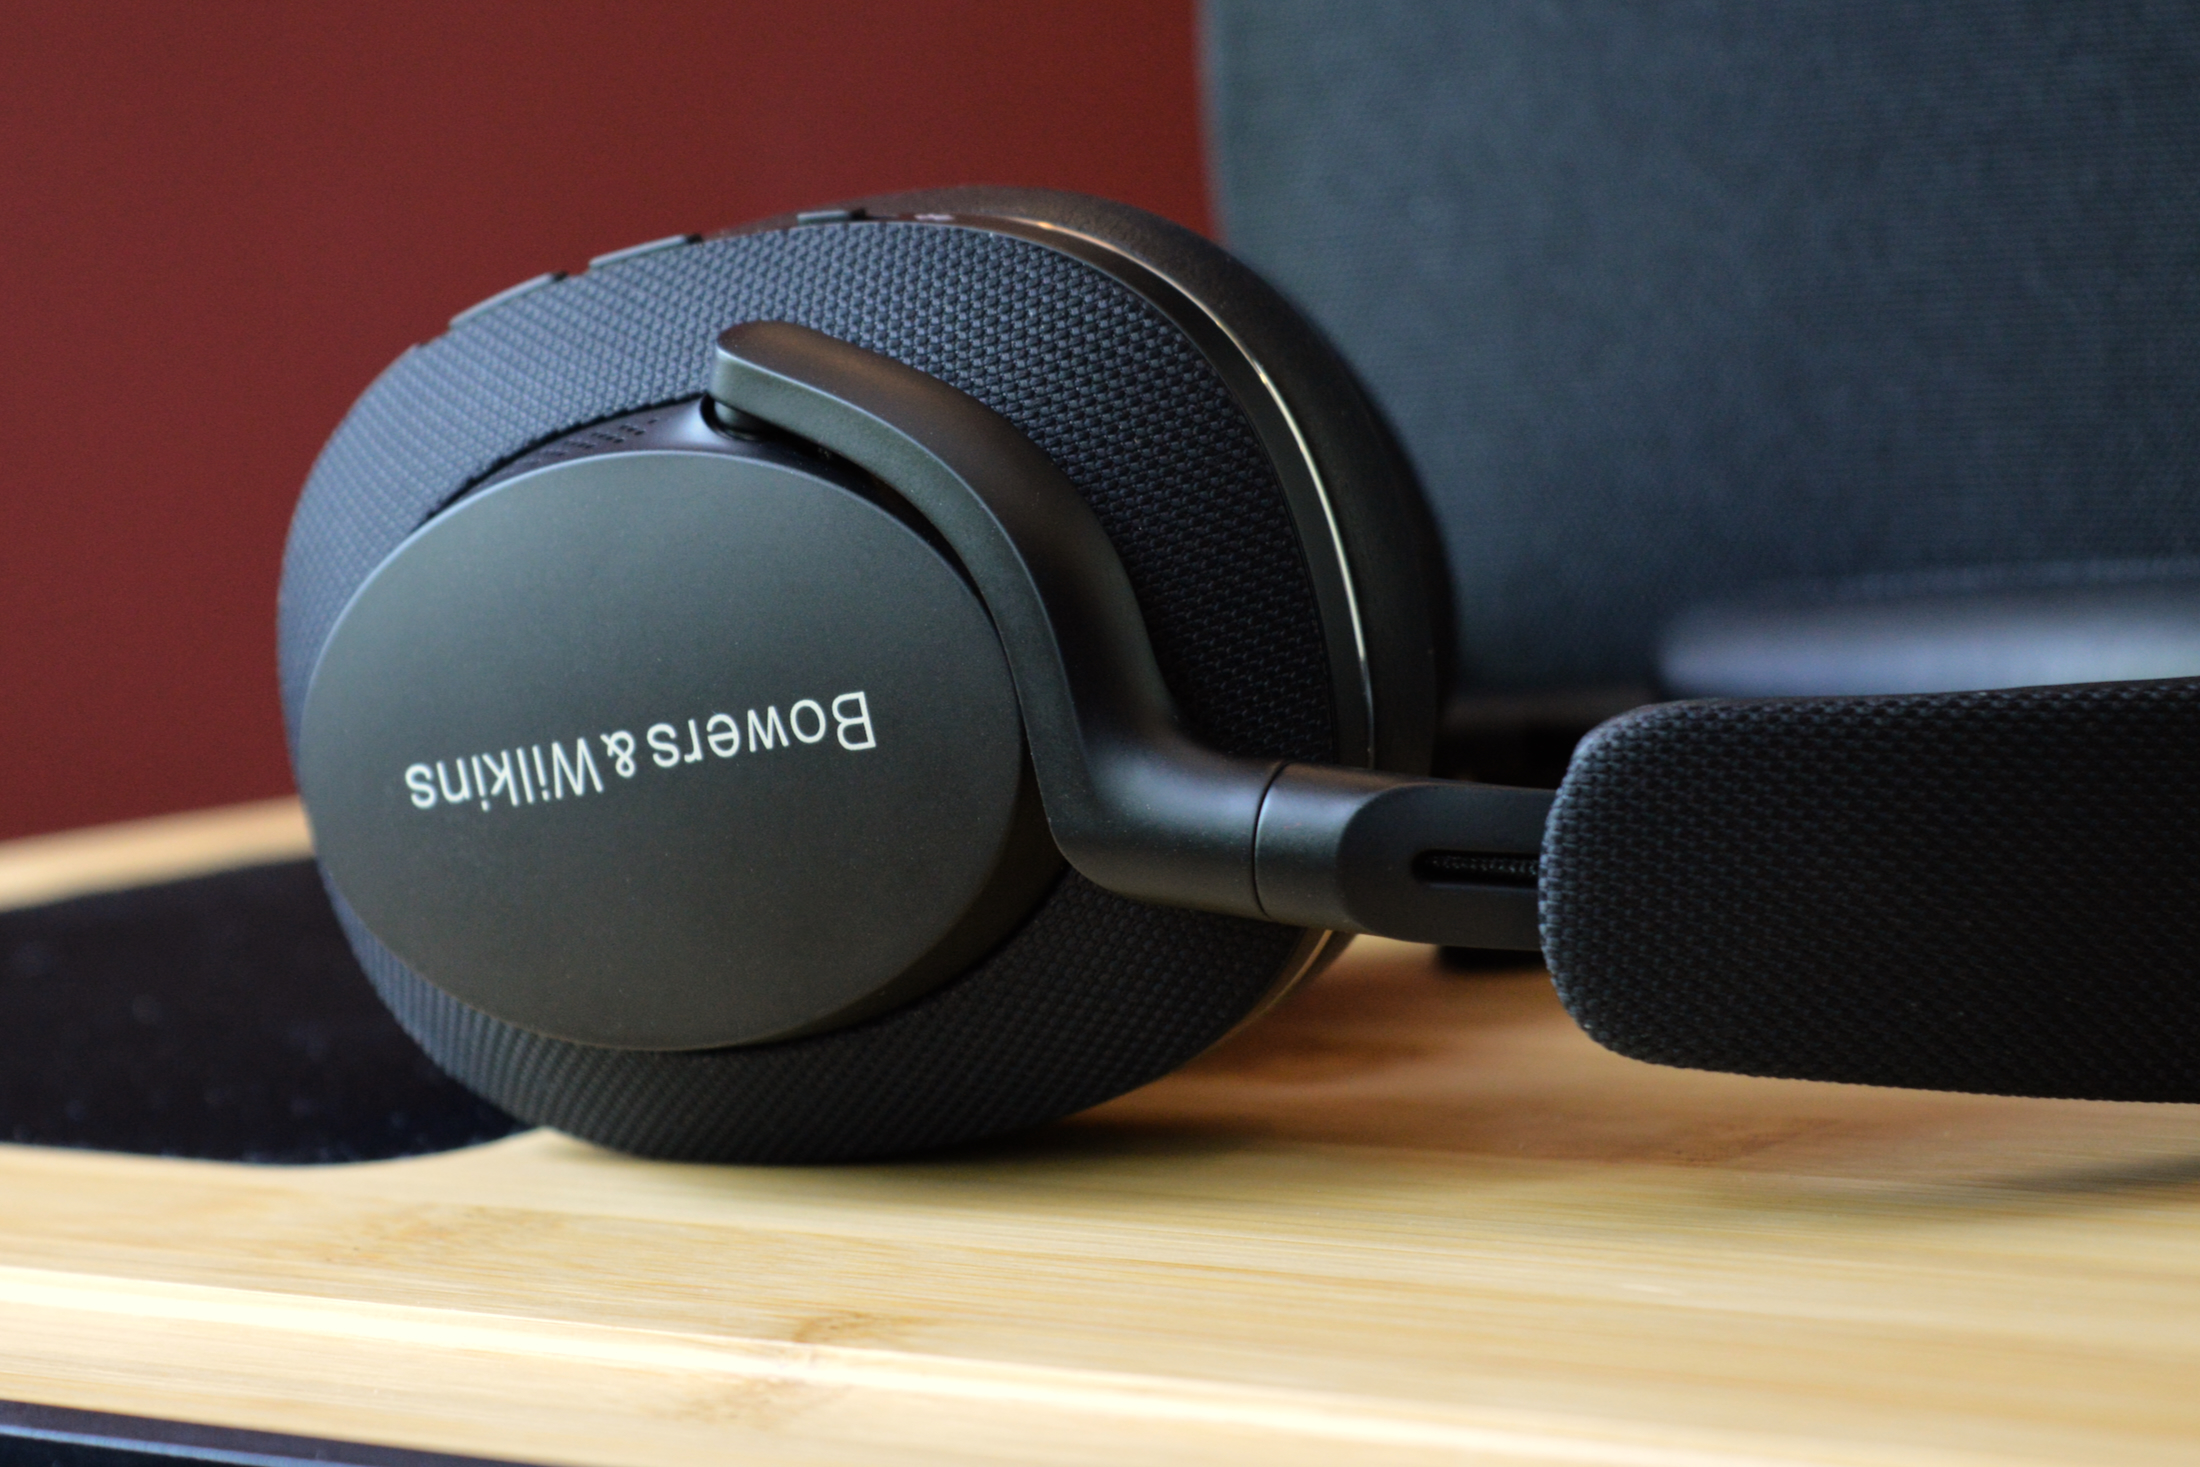 Bowers & Wilkins PX7 S2 (Blue) Over-ear noise-canceling wireless headphones  at Crutchfield